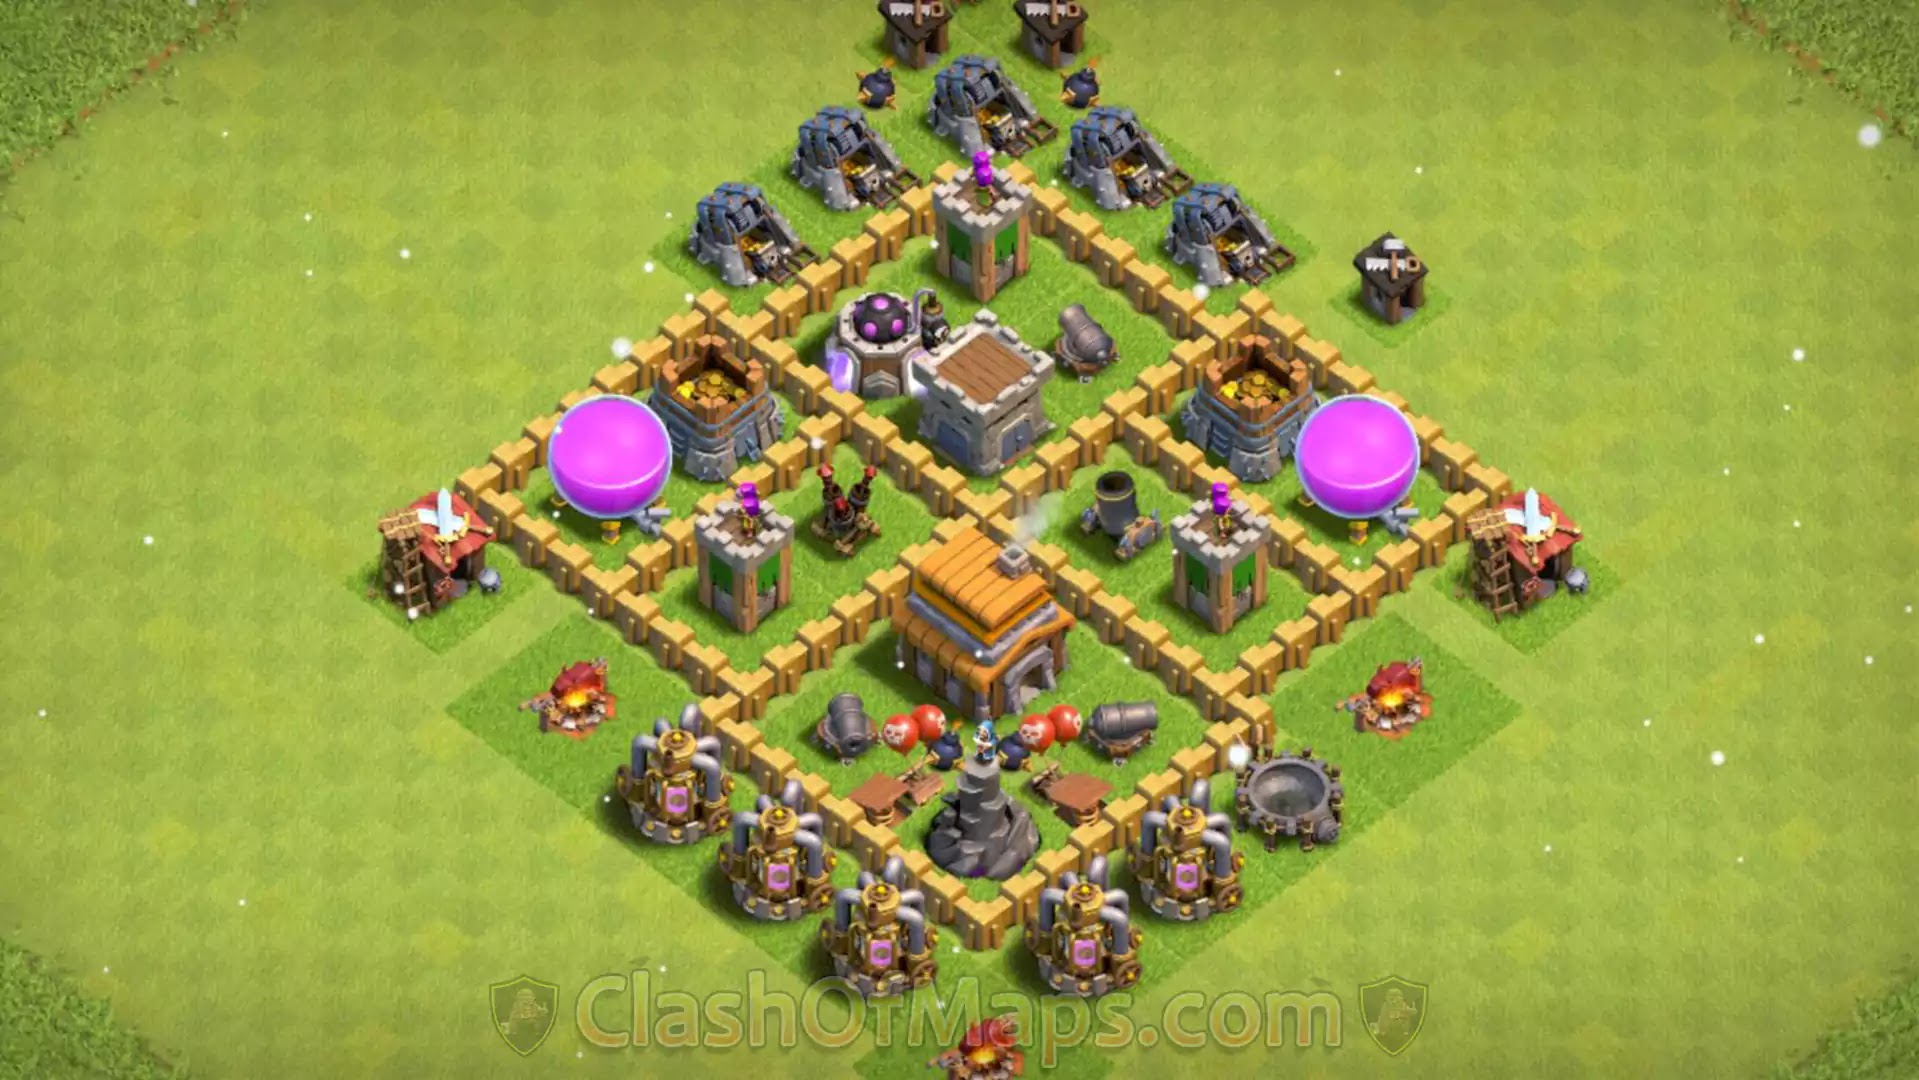 th5,th5 base,base for th5,th5 base layout,th5 base link,best th5 base,th5 war base,th5 coc base,th5 builder base,th5 farming base,th5 attack strategy,th5 layout,best army for th5,th5 defense base,best th5 war base,th5 base,base for th5,th5 base layout,th5 base link,best th5 base,th5 war base,th5 base design,th5 base trophy,th5 base farming,th5 base hybrid,th5 war base 2020,th5 base defense,th5 base 2020,best th5 war base,th5 trophy base,how to build a coc base,th5 base copy link,th5 base clash of clans,th5 base with link,th5 hybrid base 2020,th5 war base copy link,th5 farming base 2020,best th5 base design,th5 war base layout,best th5 base in the world,th5 base war,th5 trophy base link,how to make a coc base,th5 base in coc,th5 best base copy link,town hall 5,town hall 5 base,best town hall 5 base,town hall 5 clash of clans base,town hall 5 base link,layout for town hall 5,town hall 5 layout,best town hall level 5 base,town hall 5 war base,clash of clans town hall 5,town hall 5 defense base,town hall 5 builder base,best army for town hall 5,best town hall 5 war base,town hall 5 war base 2020,town hall 5 defense base link,town hall 5 attack strategy,best town hall 5 attack strategy,town hall 5 farming base,town hall 5 army,town hall 5 trophy base,town hall 5 hybrid base,town hall 5 setup,town hall 5 best defense,town hall 5 base with link,best town hall five base,town hall 5 night base,town hall 5 max base,best max town hall 5 base,town hall 5 pack,town hall 5 base,best town hall 5 base,th5 war base,th5 base link,th5 base layout,clash of clans town hall 5 base,best th5 base,coc th5 base,th5 builder base,coc town hall 5 base,coc builder base th5,town hall 5 war base,clash of clans town hall 5,town hall 5 best base,clash of clans th5 base,coc town hall 5,town hall 5 layout,town hall 5 defense base link,town hall 5 base best defense,th5 best base,coc th5,best layout for town hall 5,town hall 5 defense base,best th 5,th5 layout